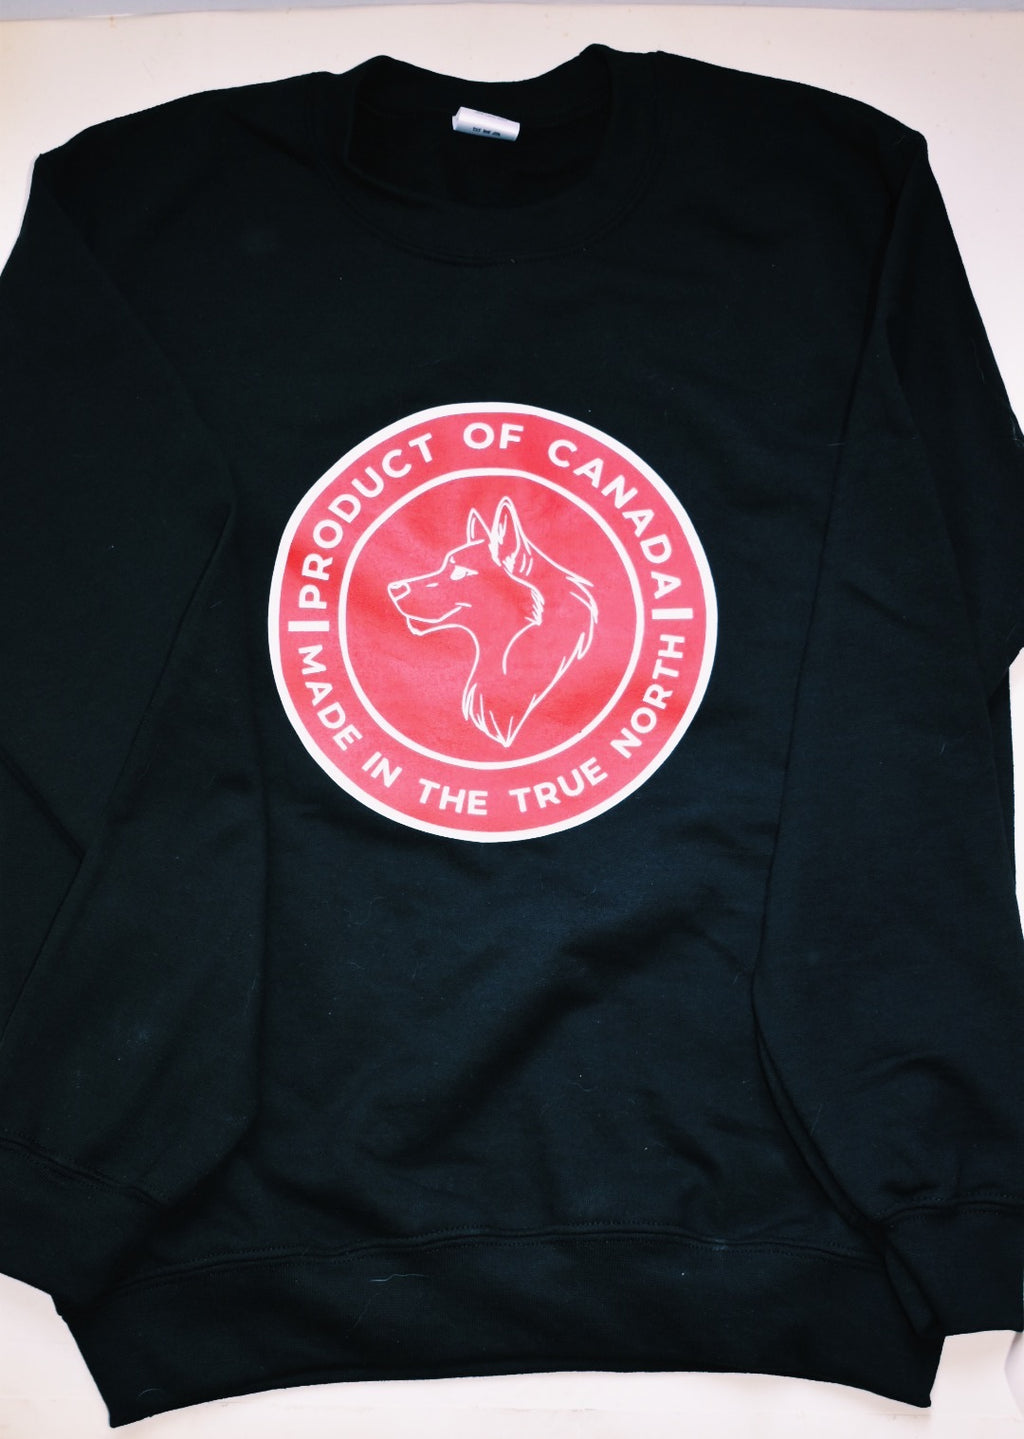 Product of Canada Wolf Sweater